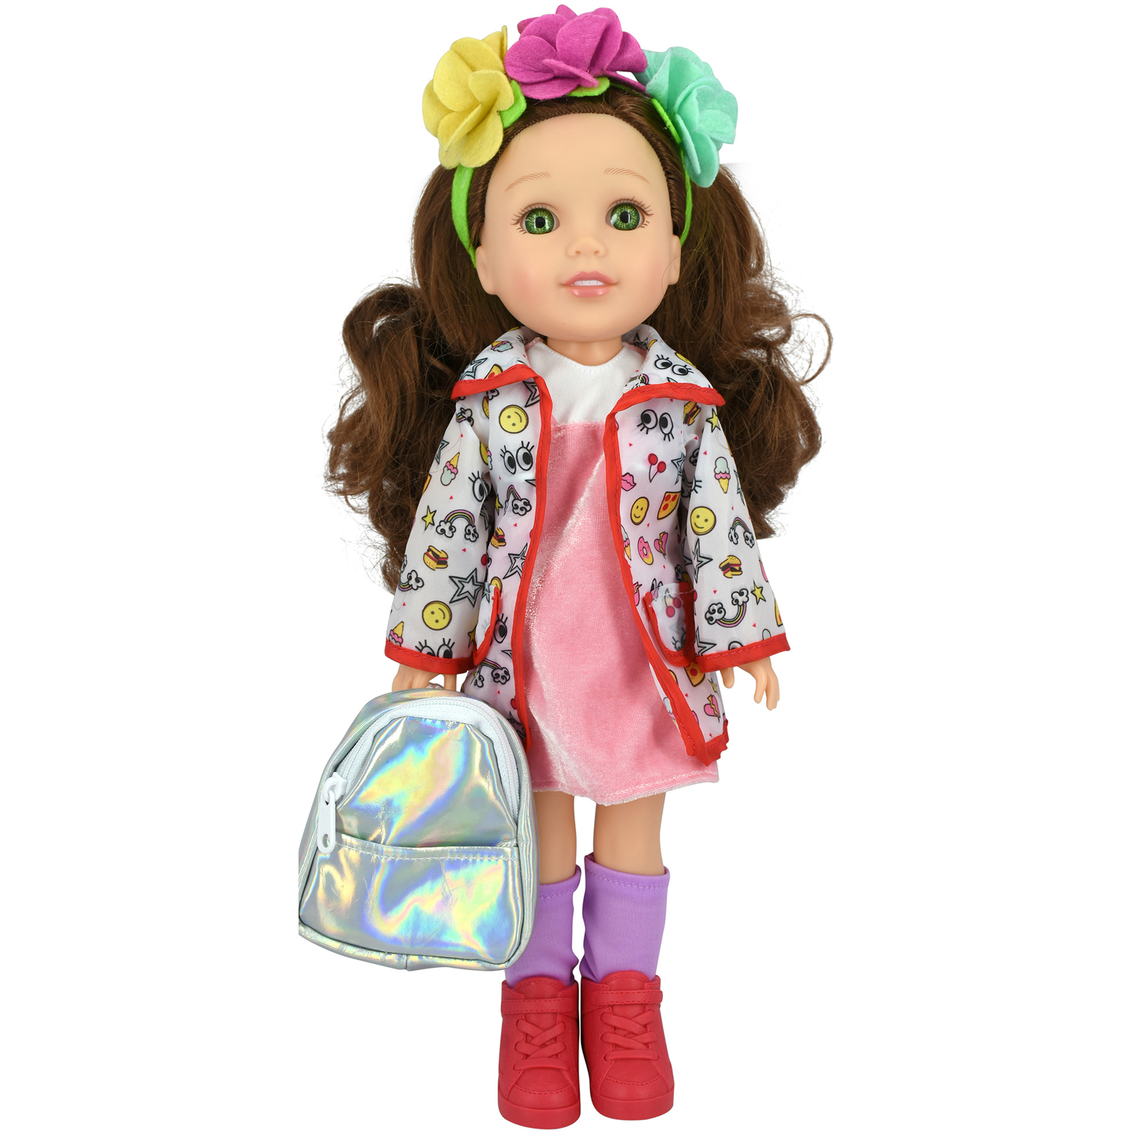 New Adventures Style Dreamers Melanie Doll, 14 in. - Image 2 of 2